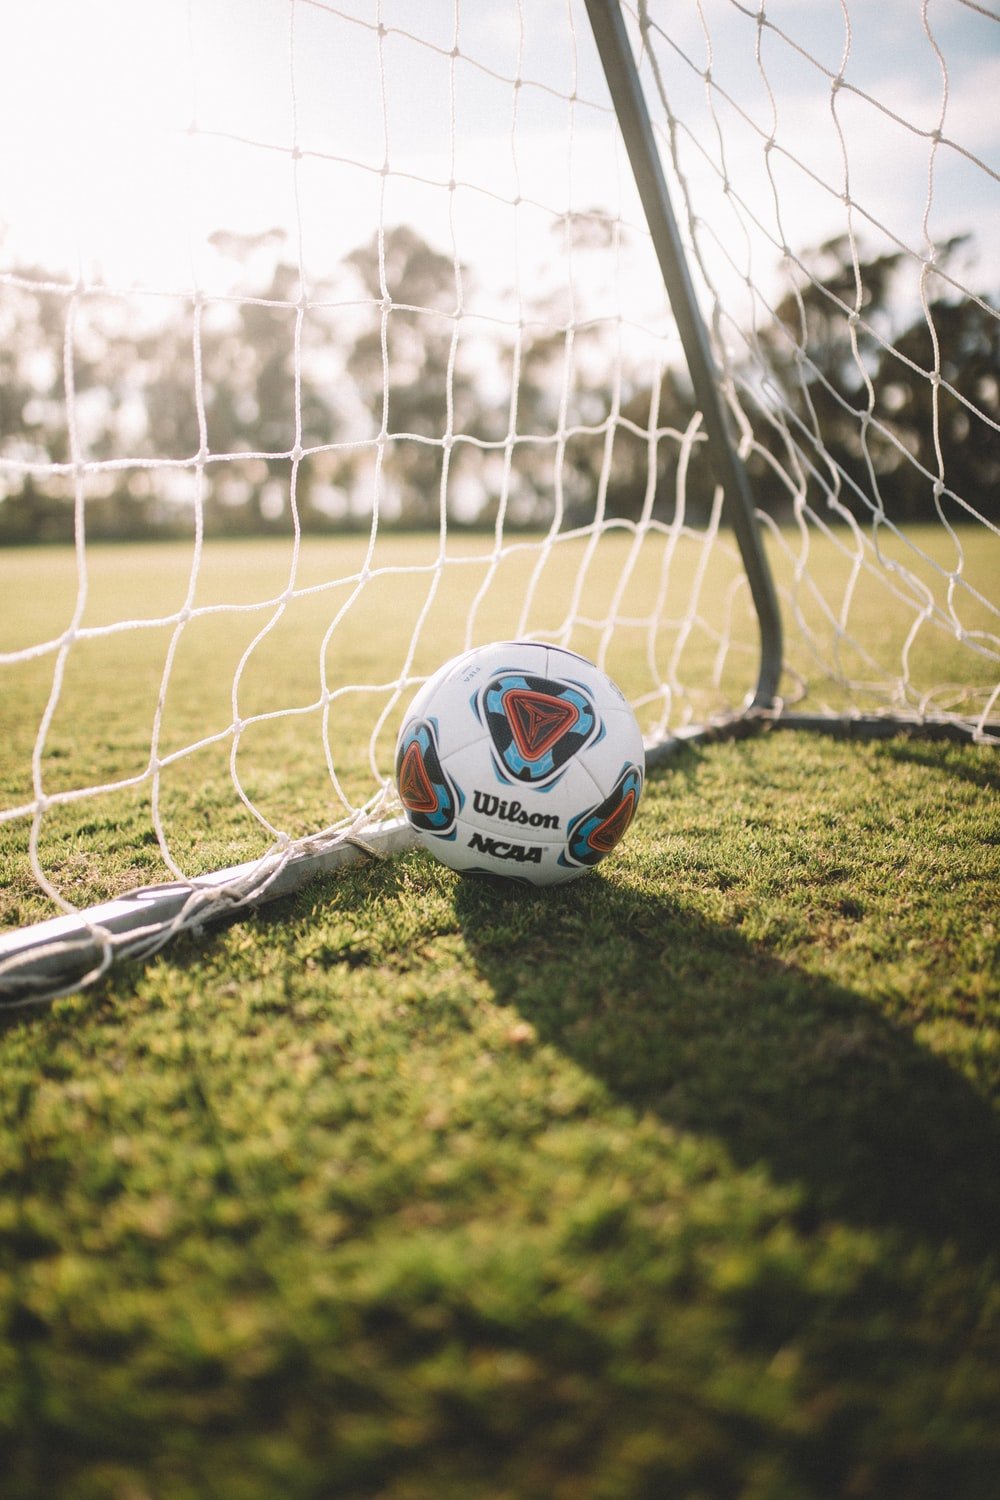 Football Goal Picture. Download Free Image